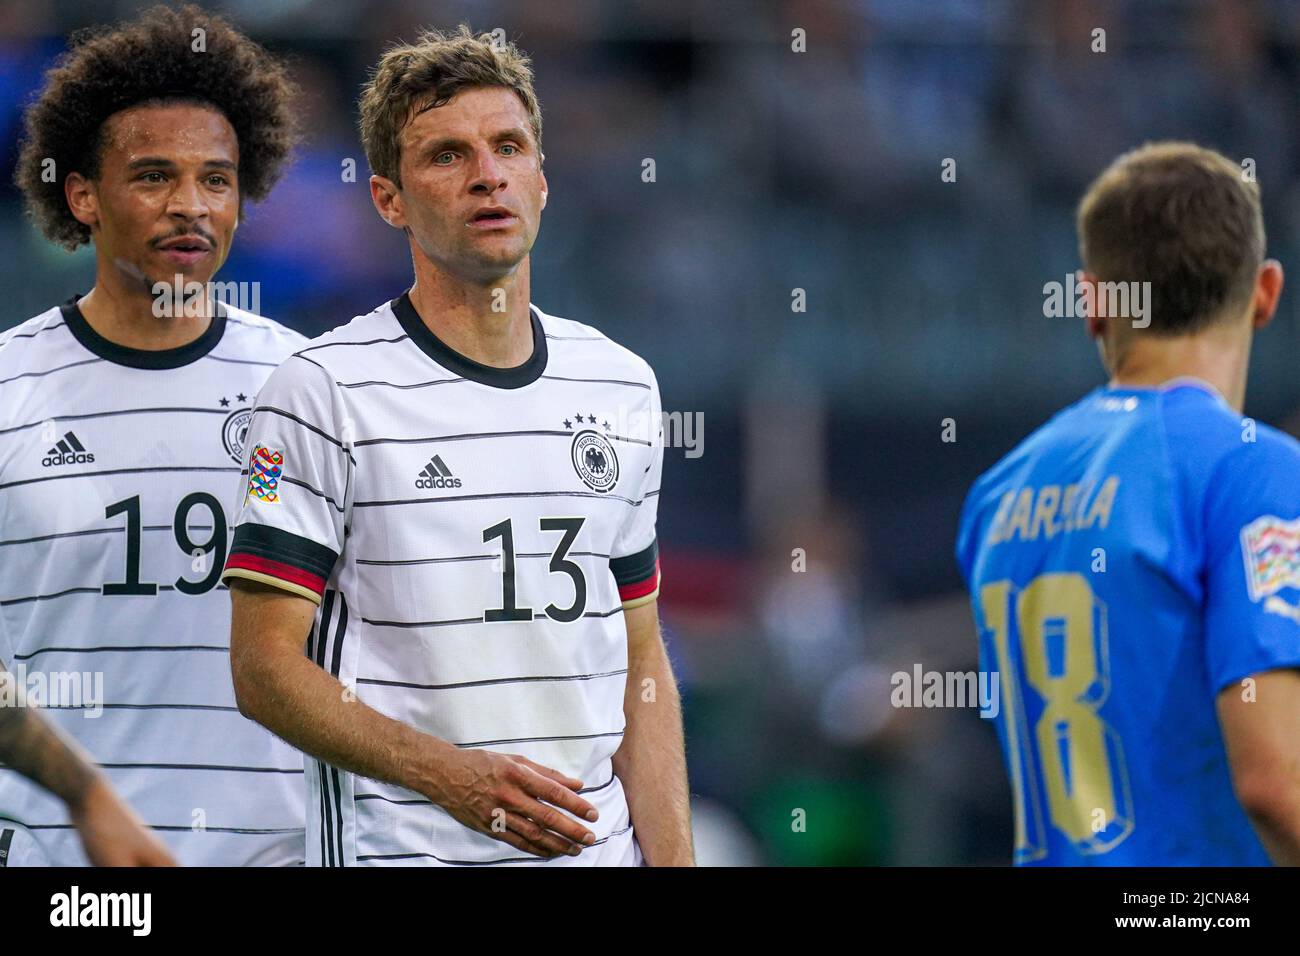 MöNCHENGLADBACH, GERMANY - JUNE 14: Thomas Muller of Germany during the UEFA Nations League match between Germany and Italy at Borussia-Park on June 14, 2022 in Mönchengladbach, Germany (Photo by Joris Verwijst/Orange Pictures) Stock Photo